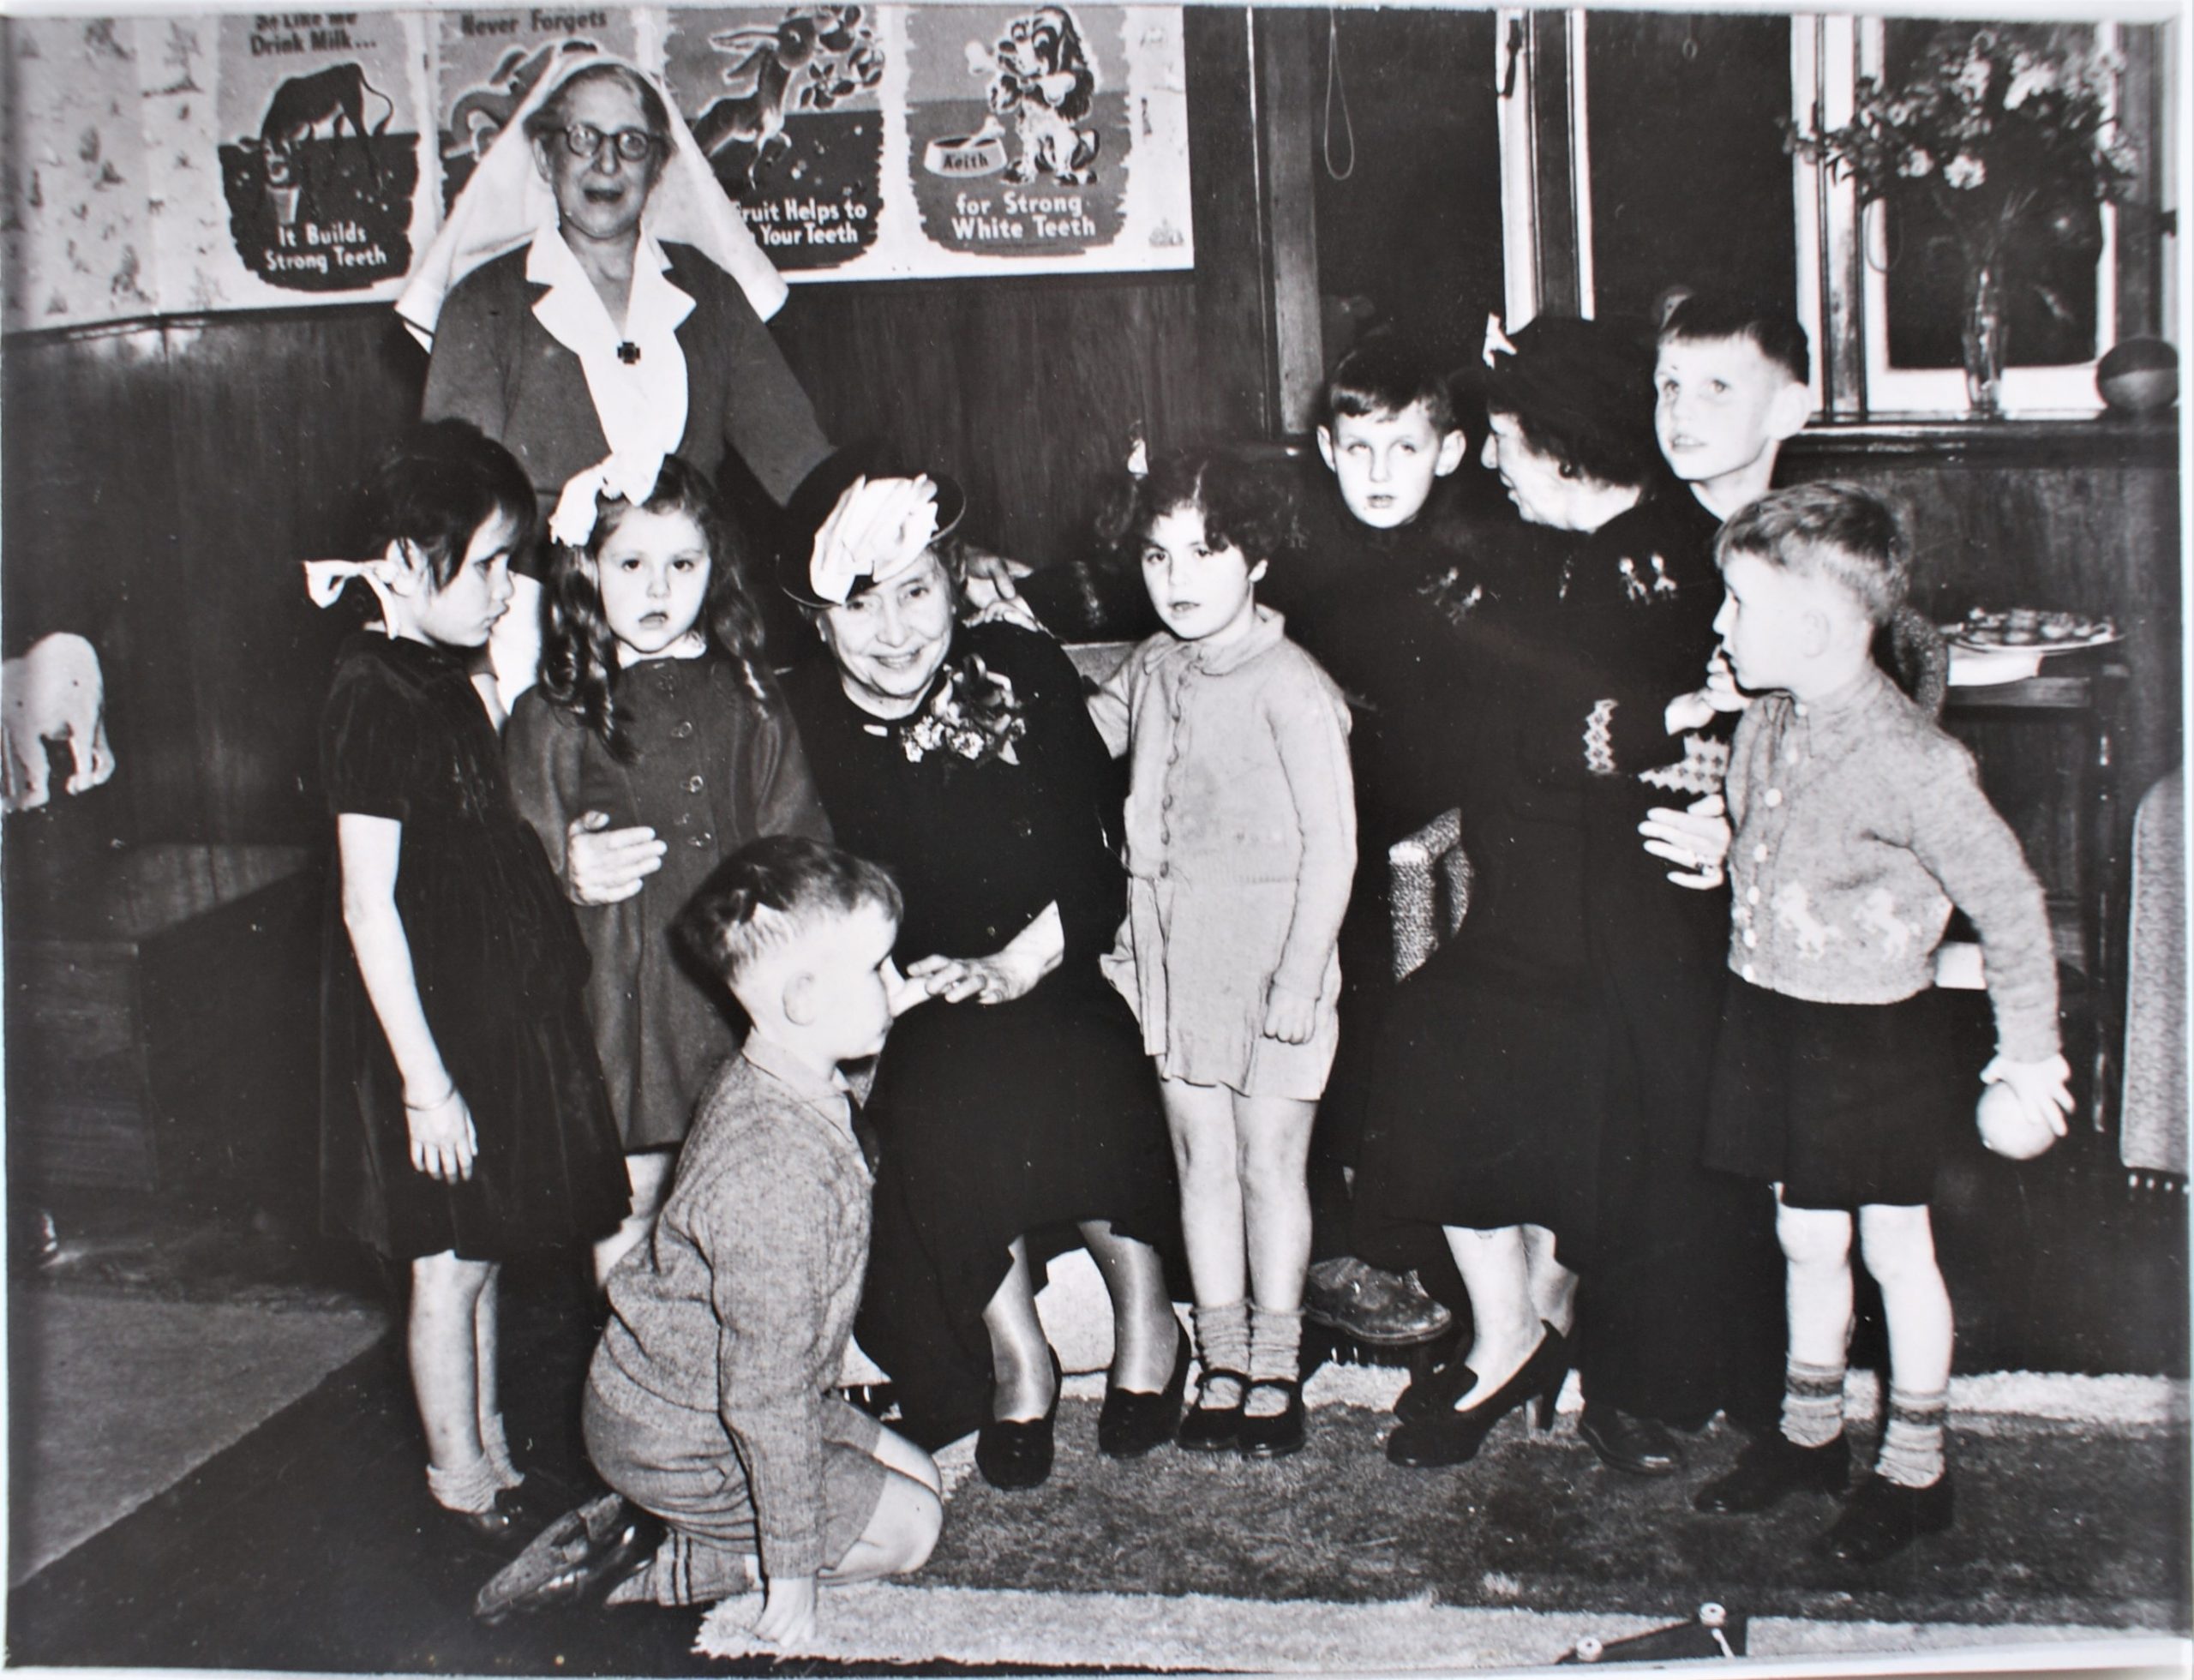 Helen Keller and a companion are sitting surrounded by seven children at the Sunrise home. At the back of the group is a woman in nurses uniform. On the wall behind are posters promoting dental health and a vase of flowers on the window sill.